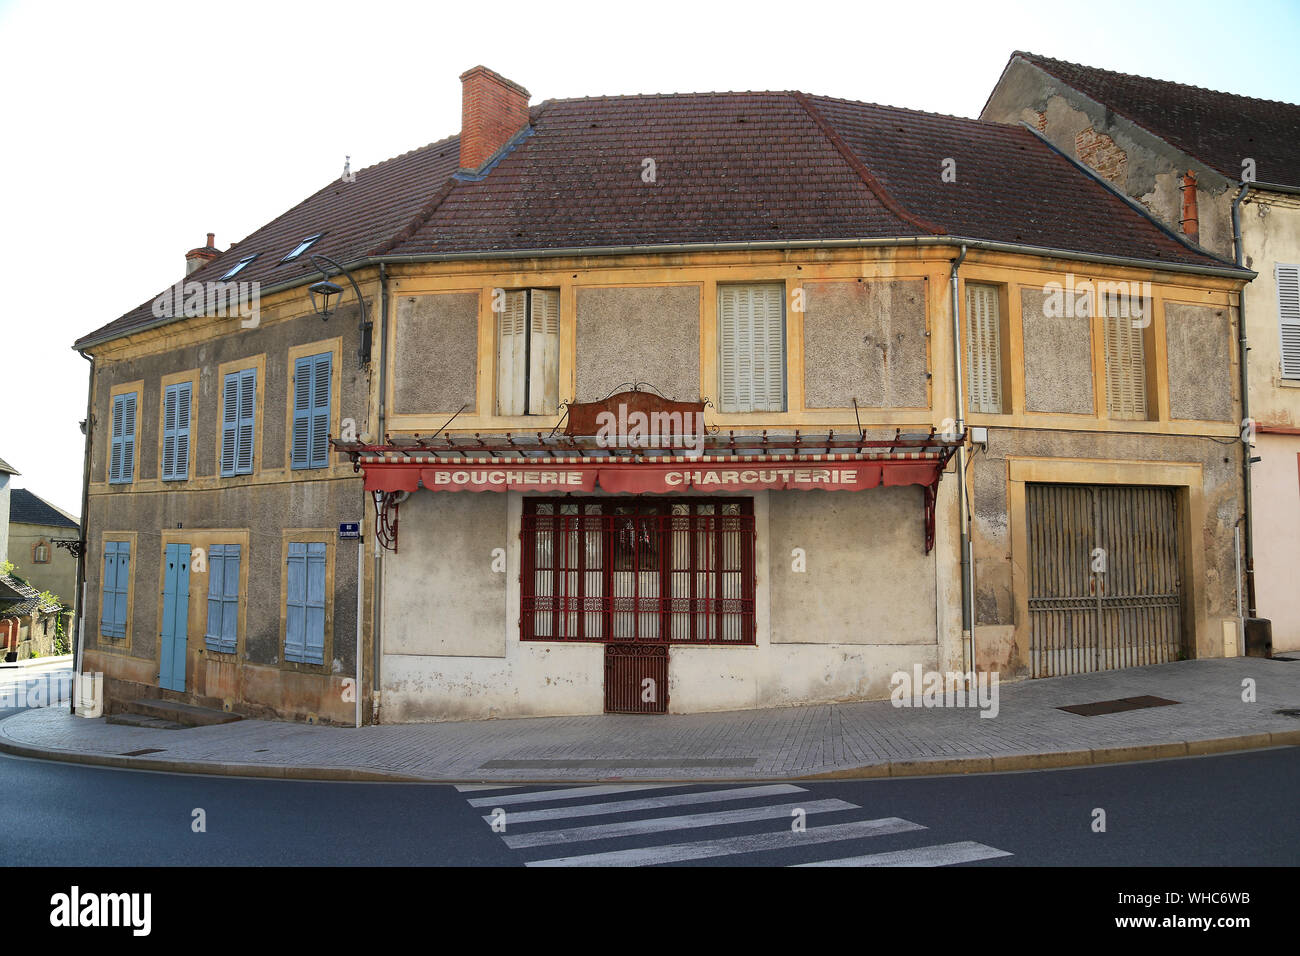 Old, run down, Boucherie & Charcuterie shop in France. Stock Photo